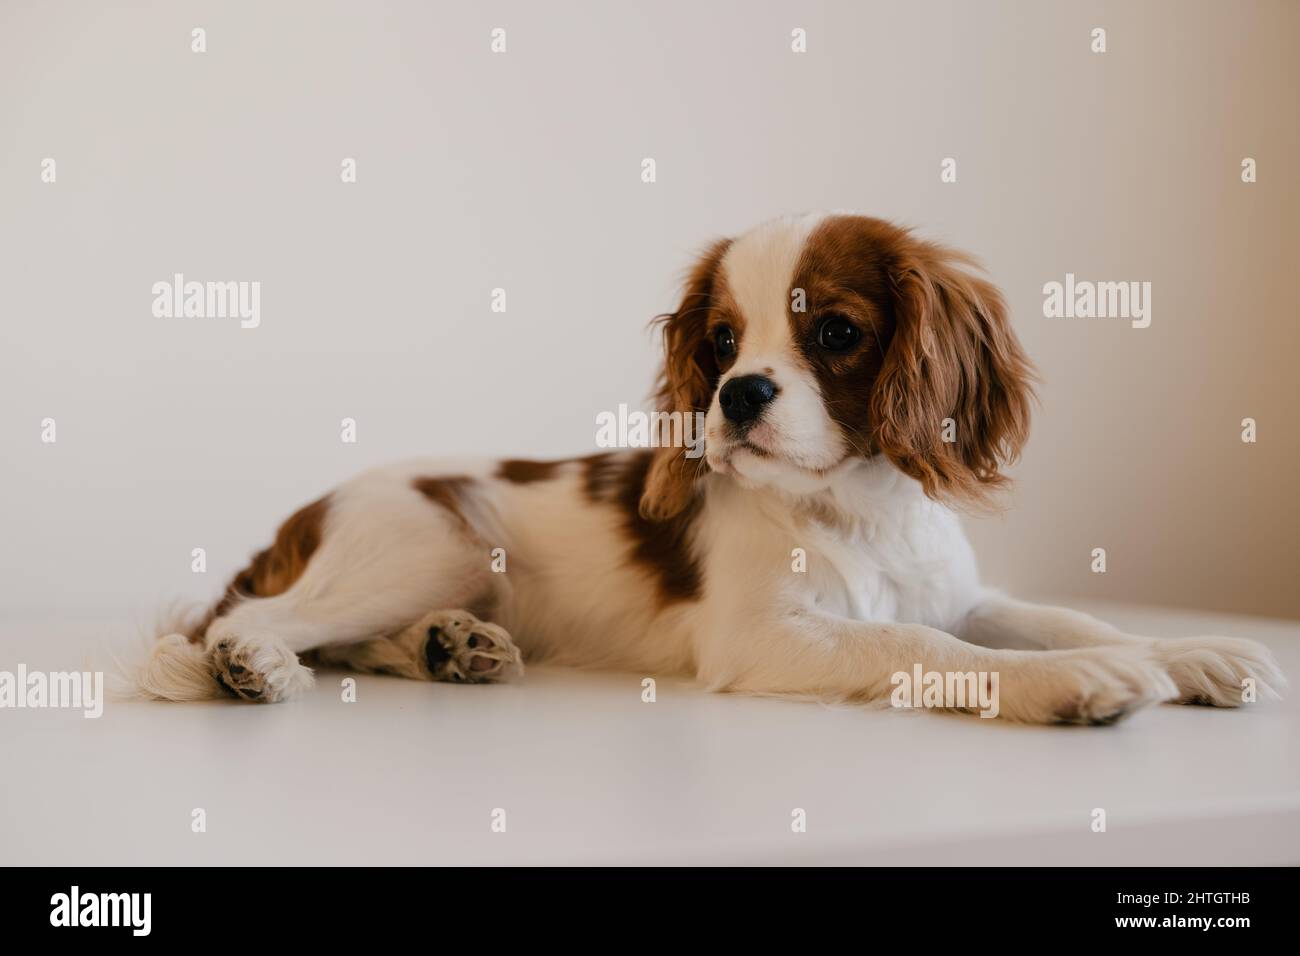 Cute Dog Portrait Laying on Table. King Charles Spaniel Laying Looking to Side Stock Photo